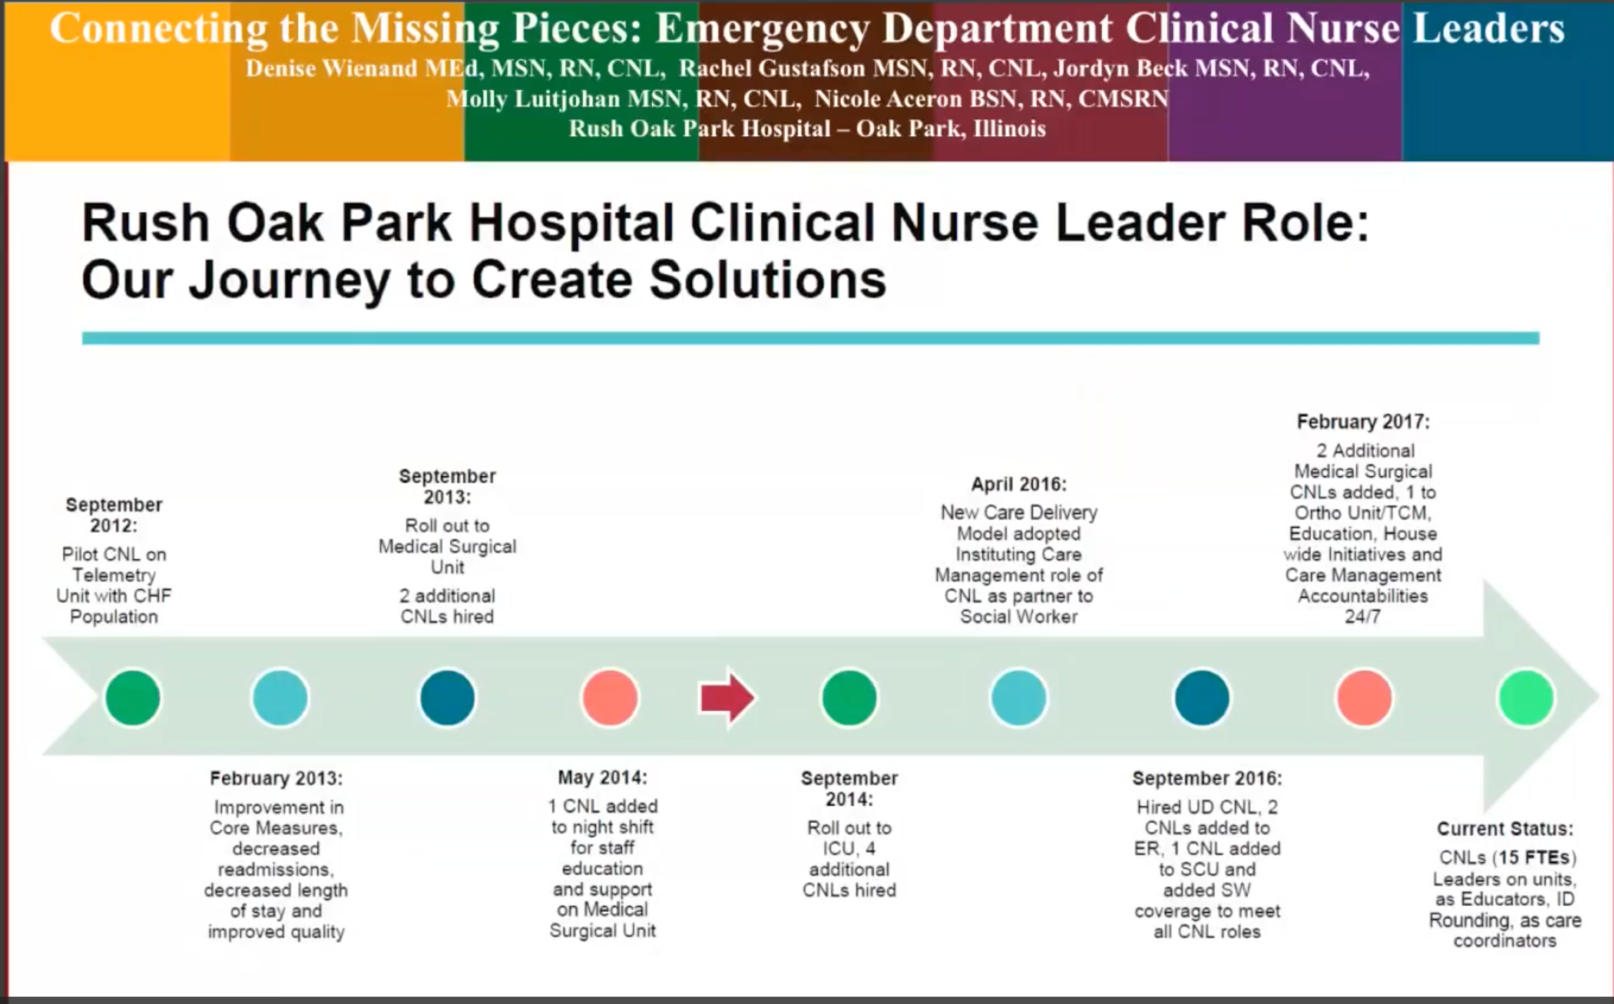 Connecting the Missing Pieces: Emergency Department Clinical Nurse Leaders